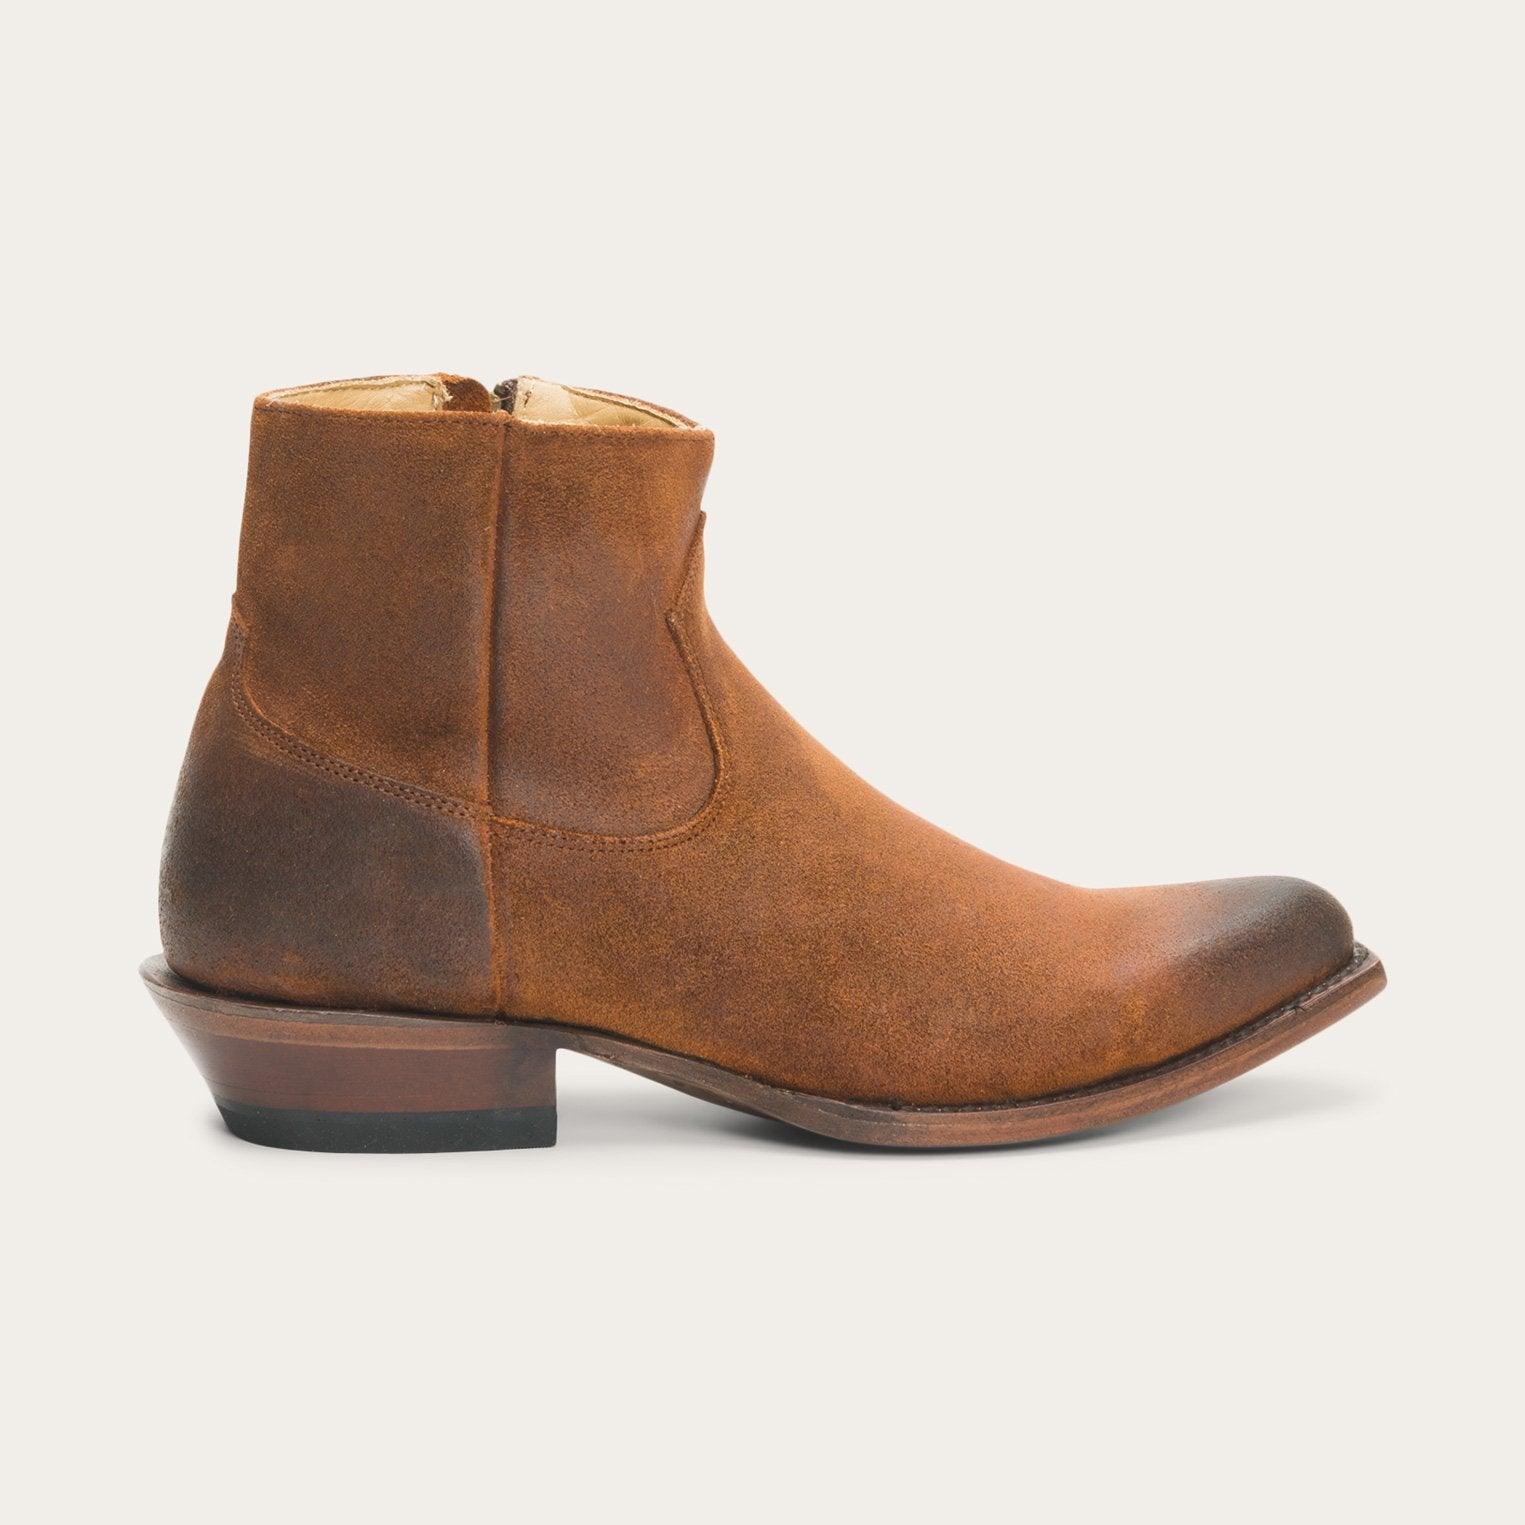 Stetson Cleo Boots - Flyclothing LLC